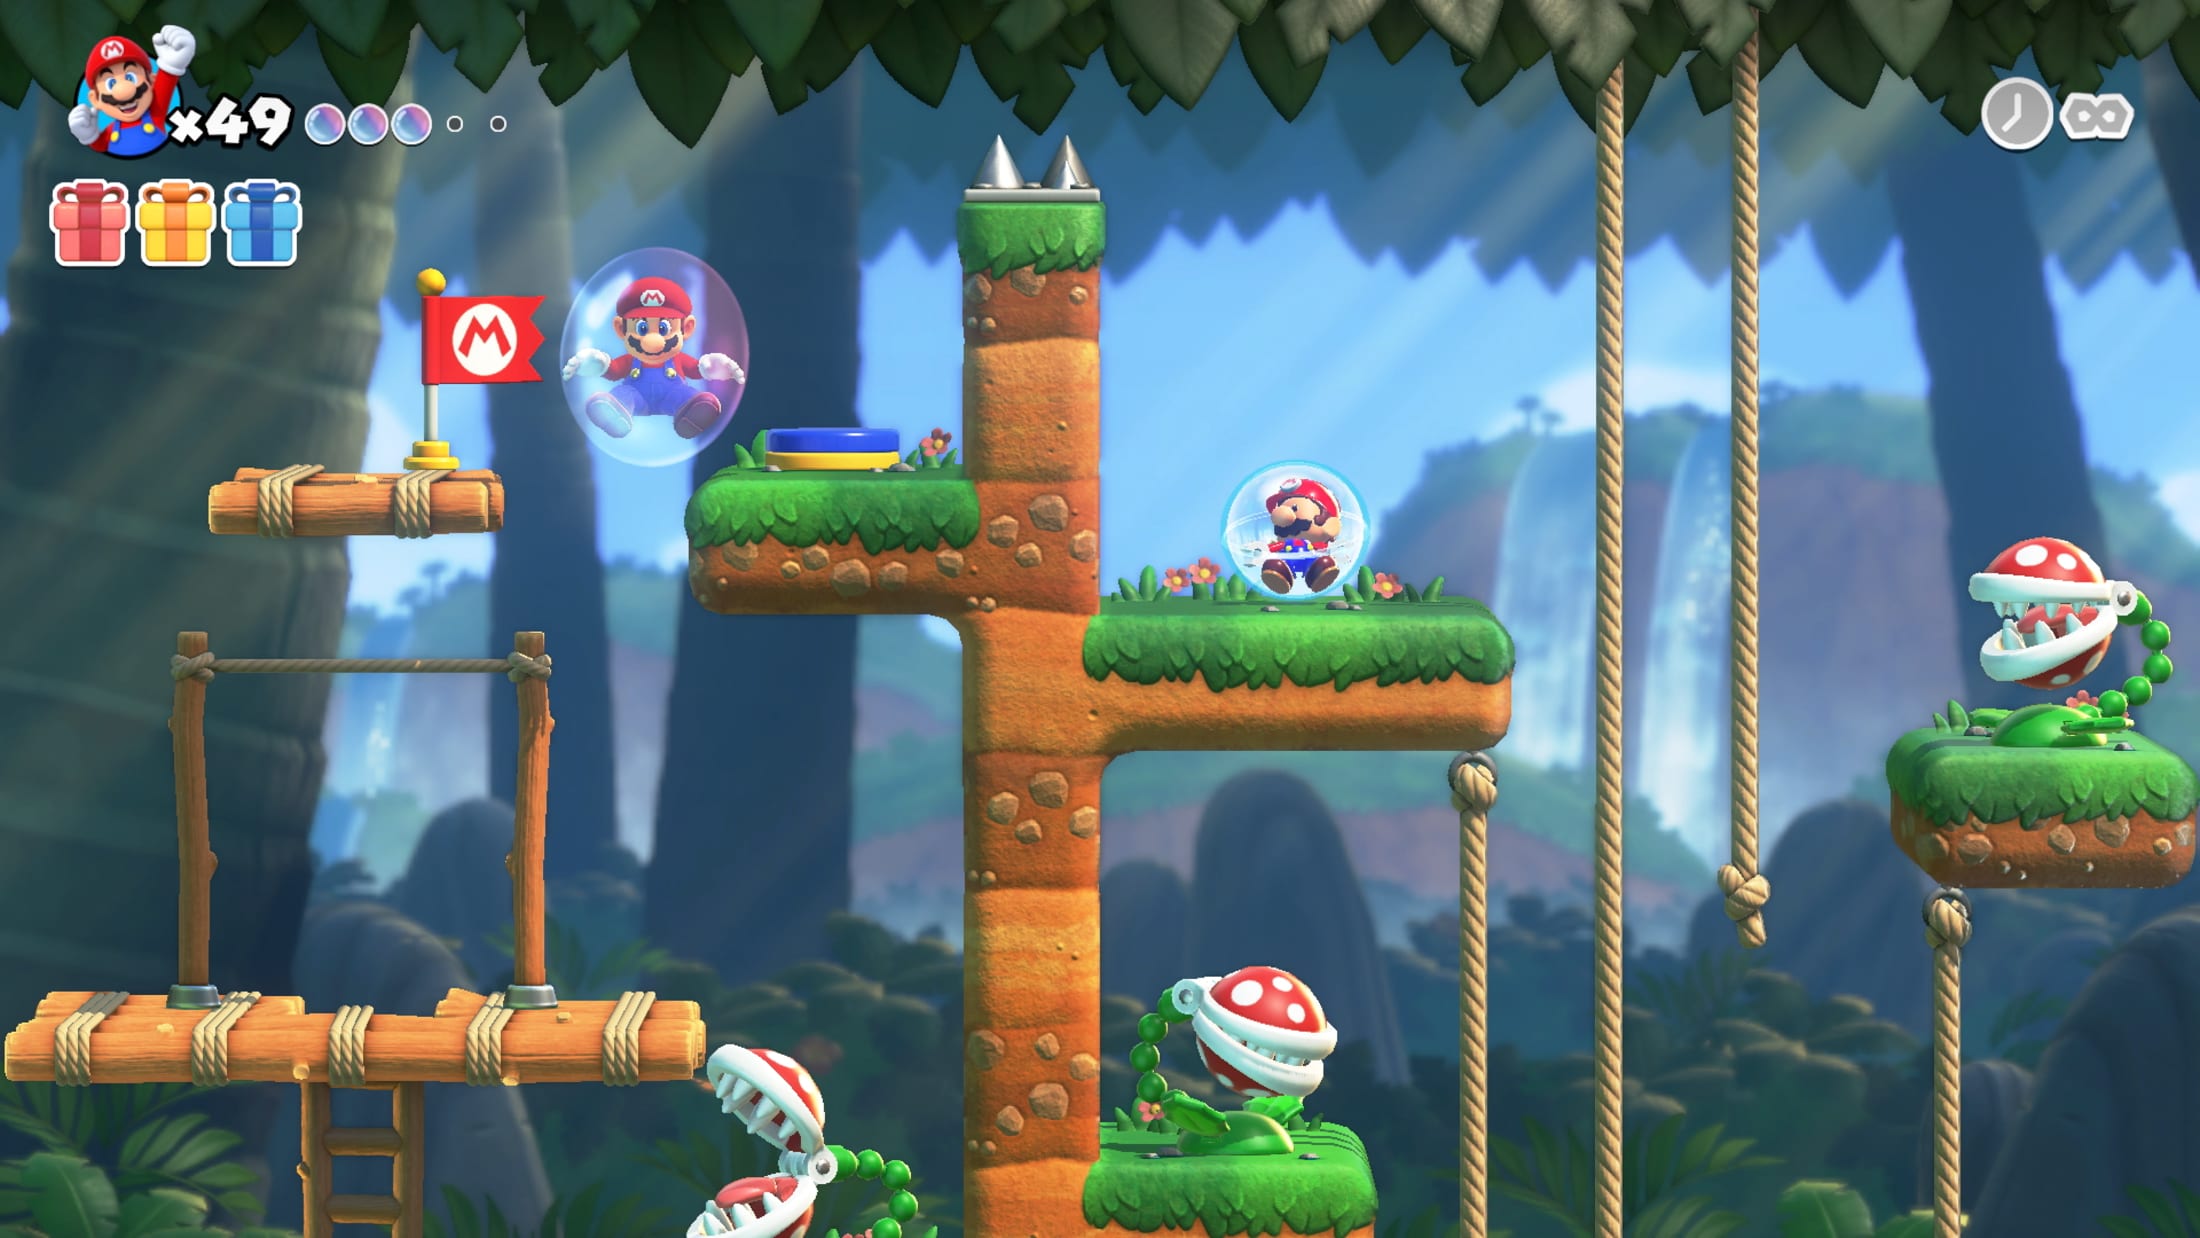 Casual Style allows Mario to get hit up to five times and is put into a safety bubble when he does, and the level timer is set to unlimited